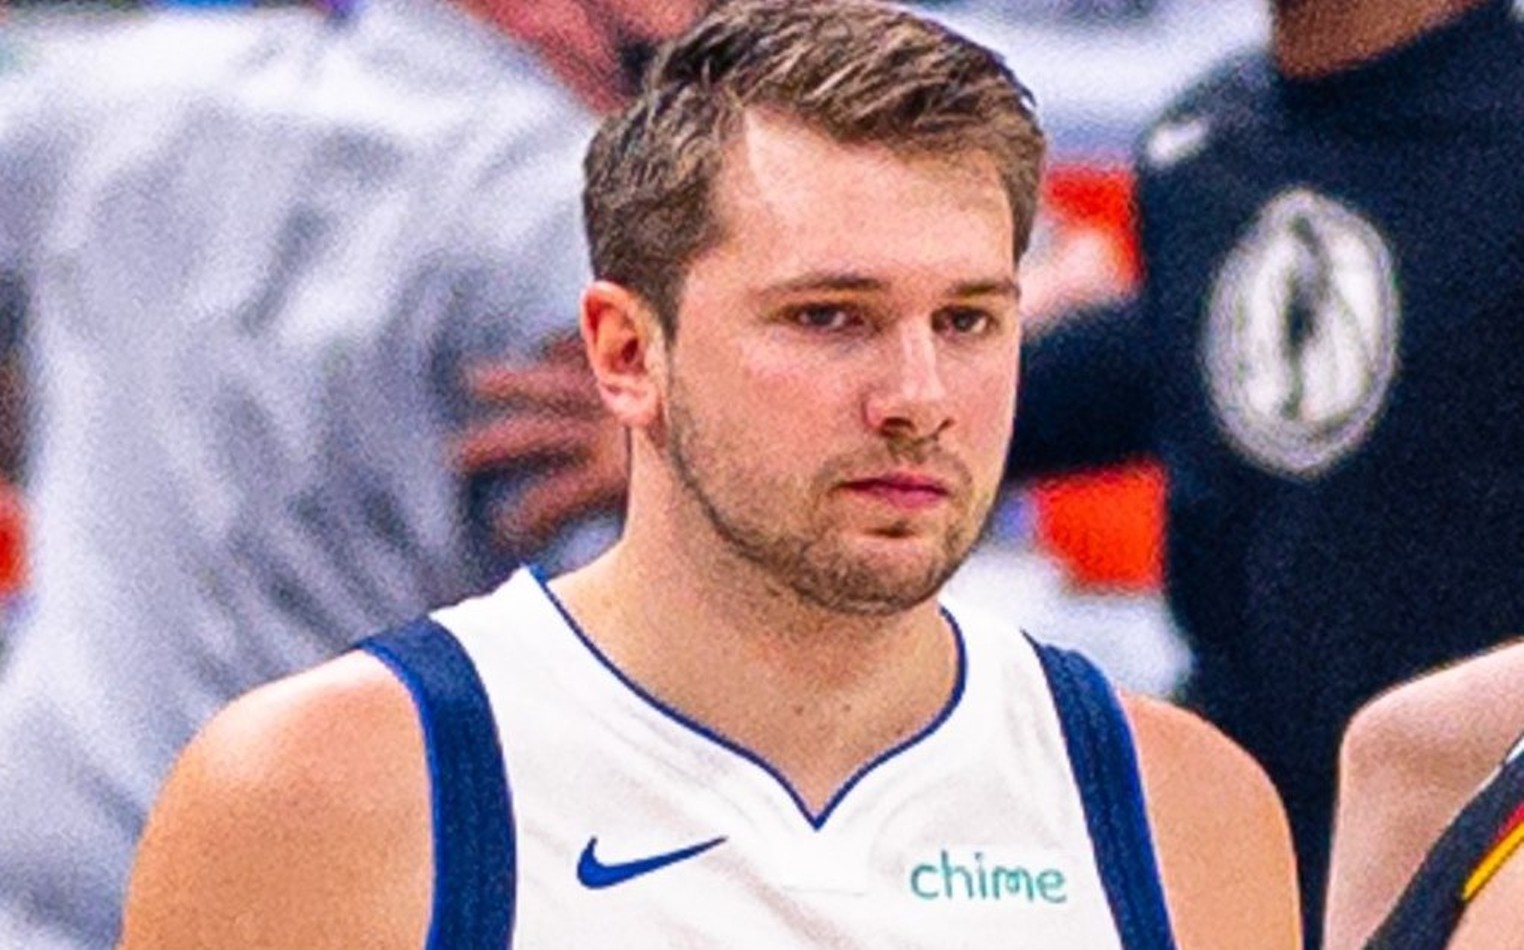 He's an animal': What Luka Doncic learned in year full of